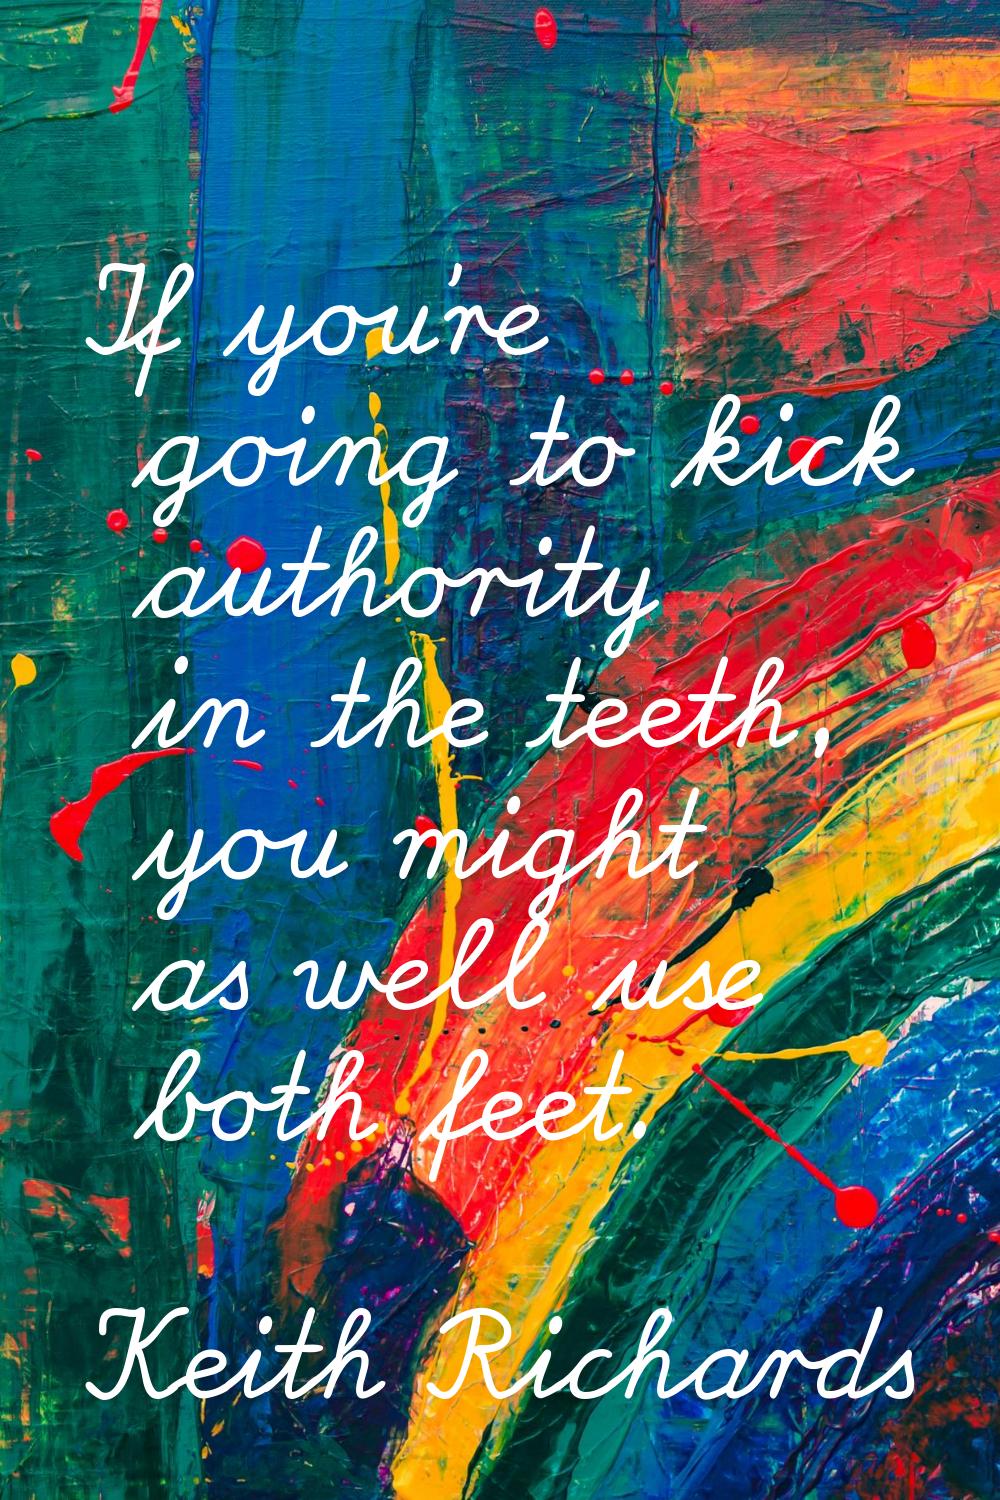 If you're going to kick authority in the teeth, you might as well use both feet.